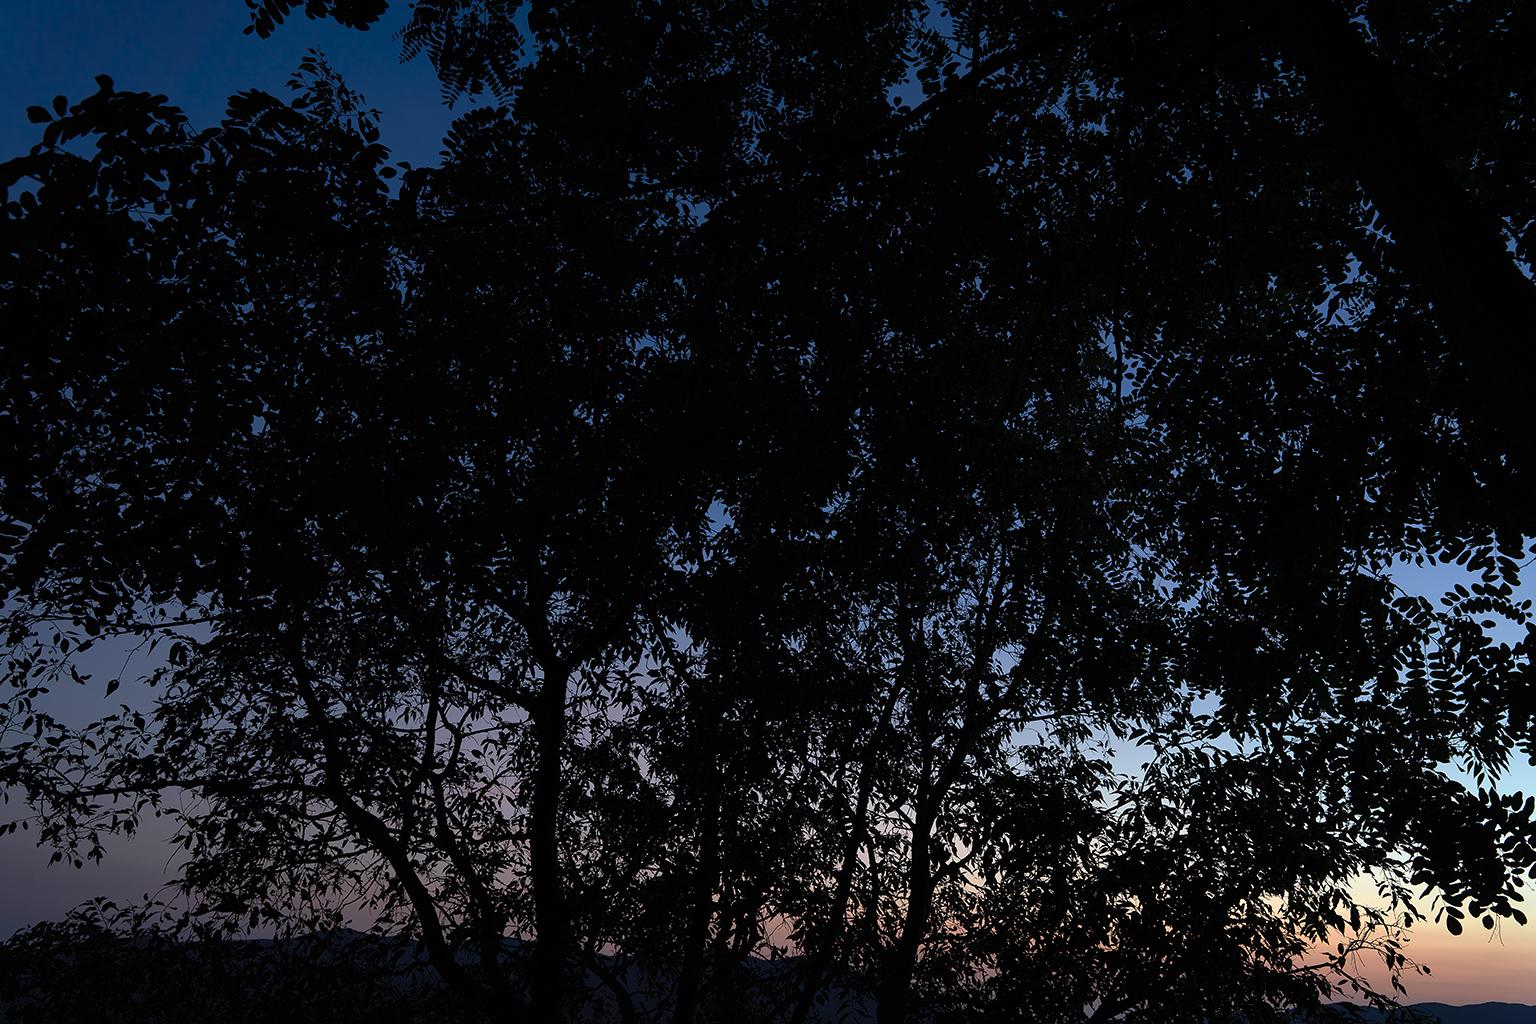 Blue Hour - large format photograph of ethereal foliage against evening sky - Print by Frank Schott